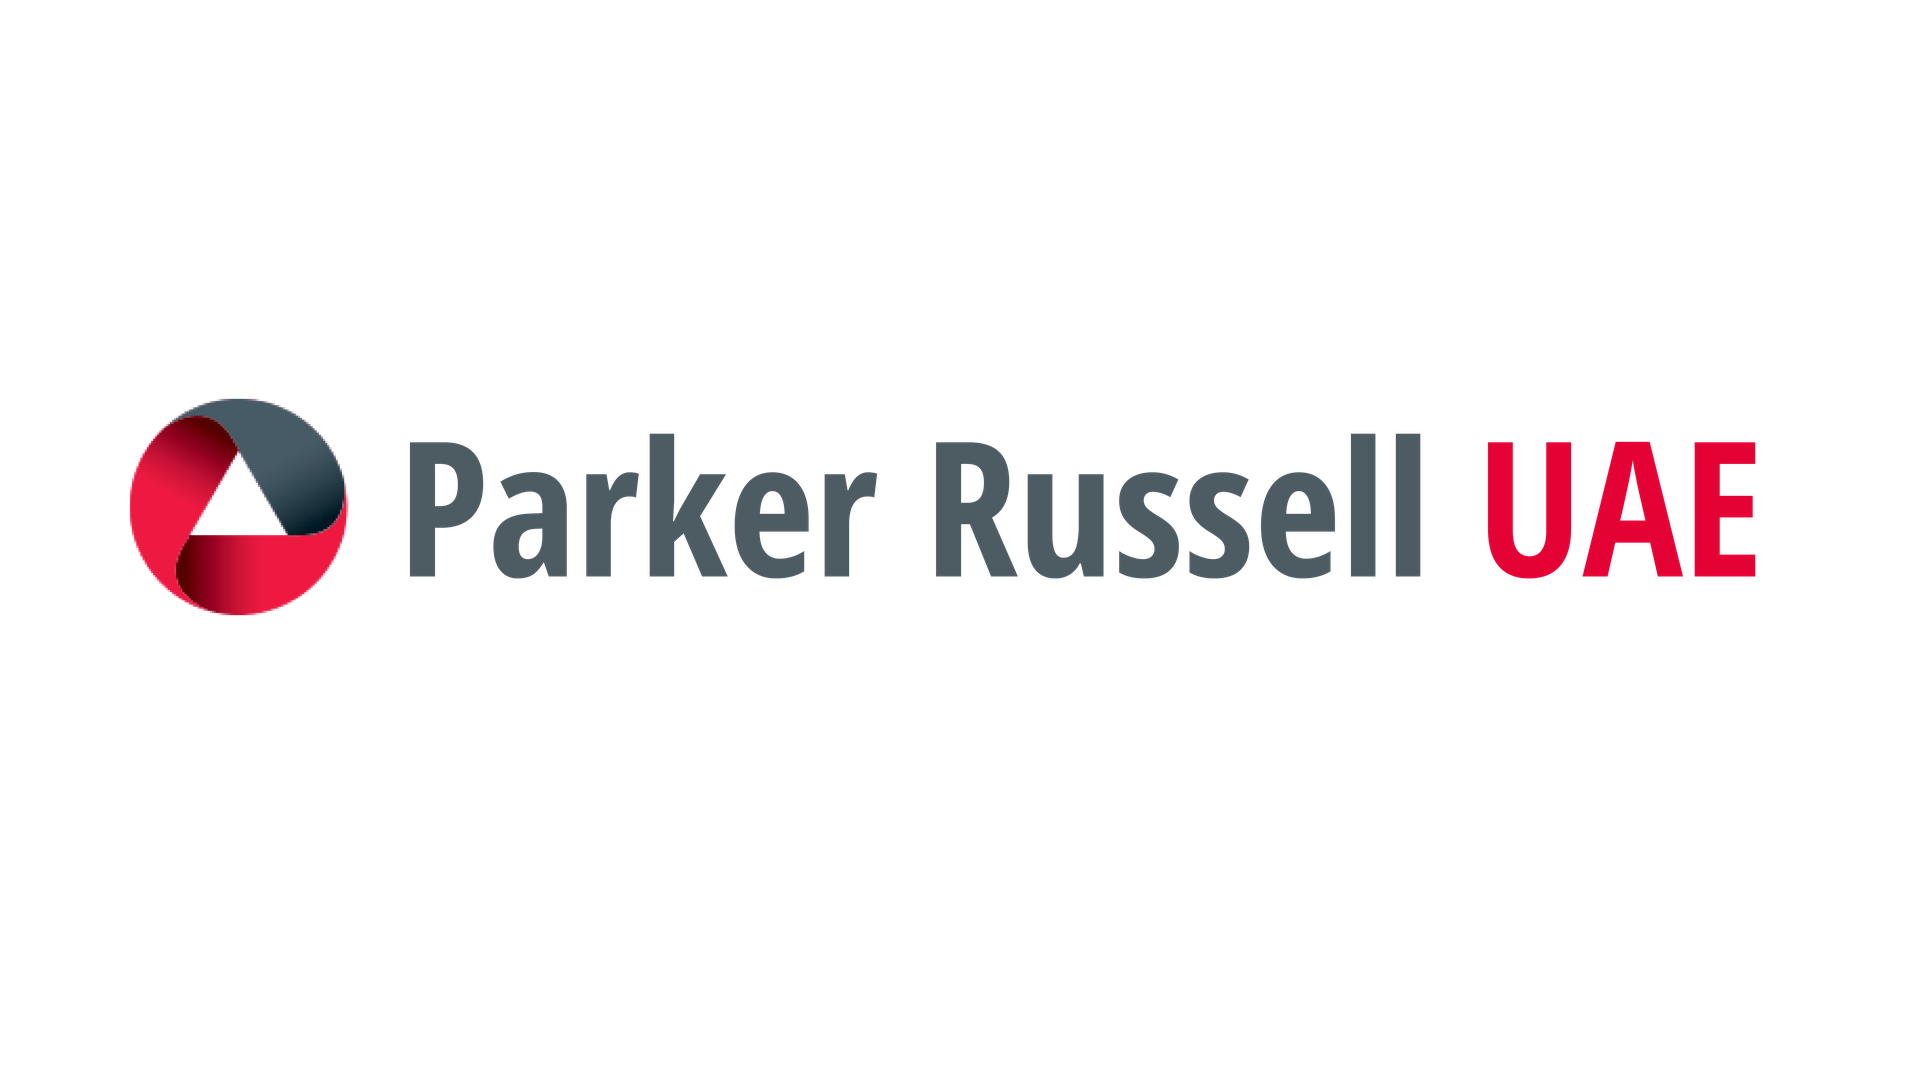 Parker Russell UAE